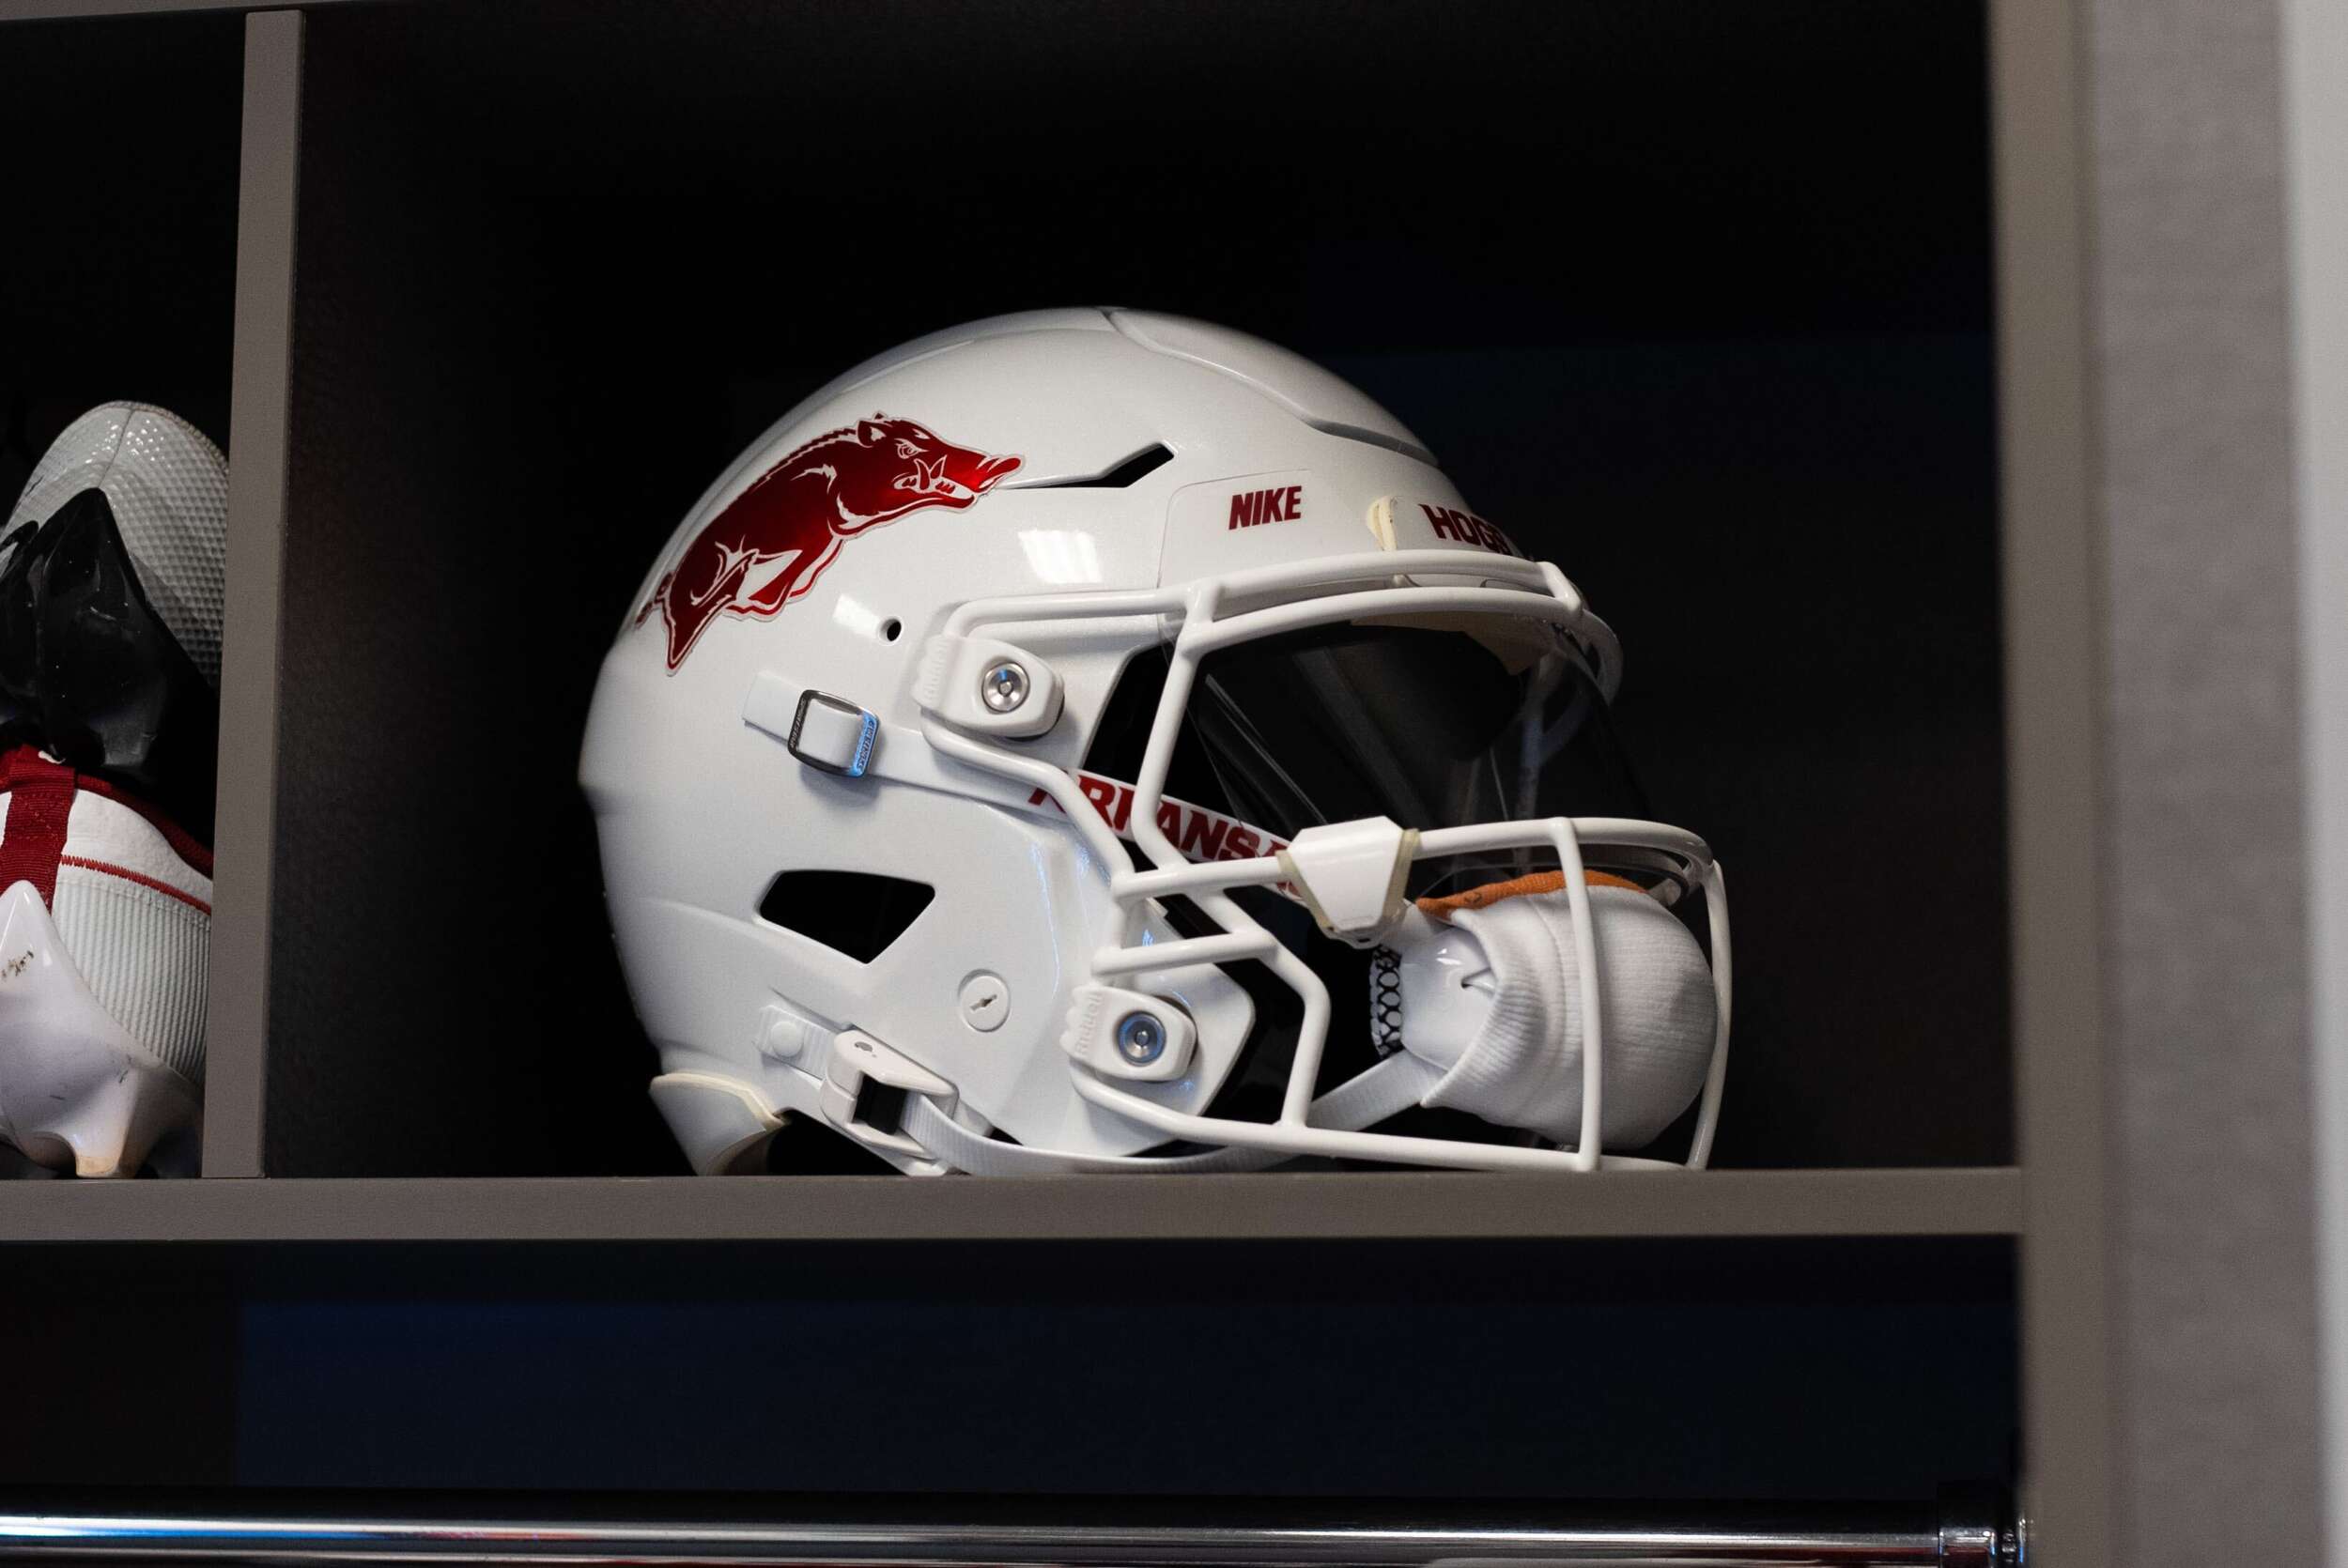 Ole Miss Releases Uniform Combination For Game vs. Arkansas - The